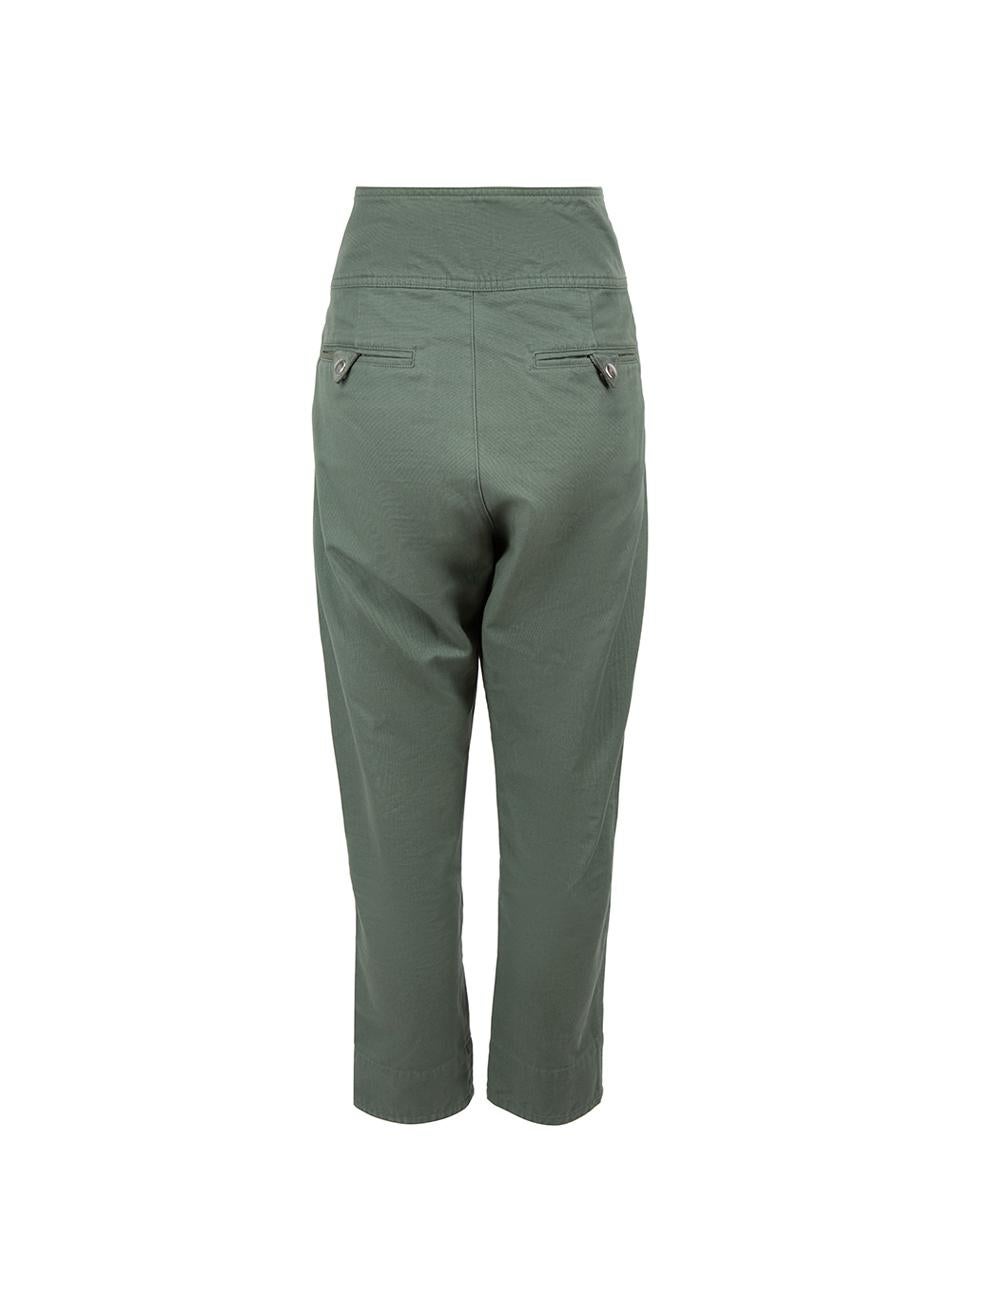 CONDITION is Very good. Hardly any visible wear to trousers is evident on this used Isabel Marant Étoile designer resale item.

Details
Green
Cotton
Trousers
Tapered fit
Cropped
High rise
Fly zip and button fastening
2x Side pockets
2x Back